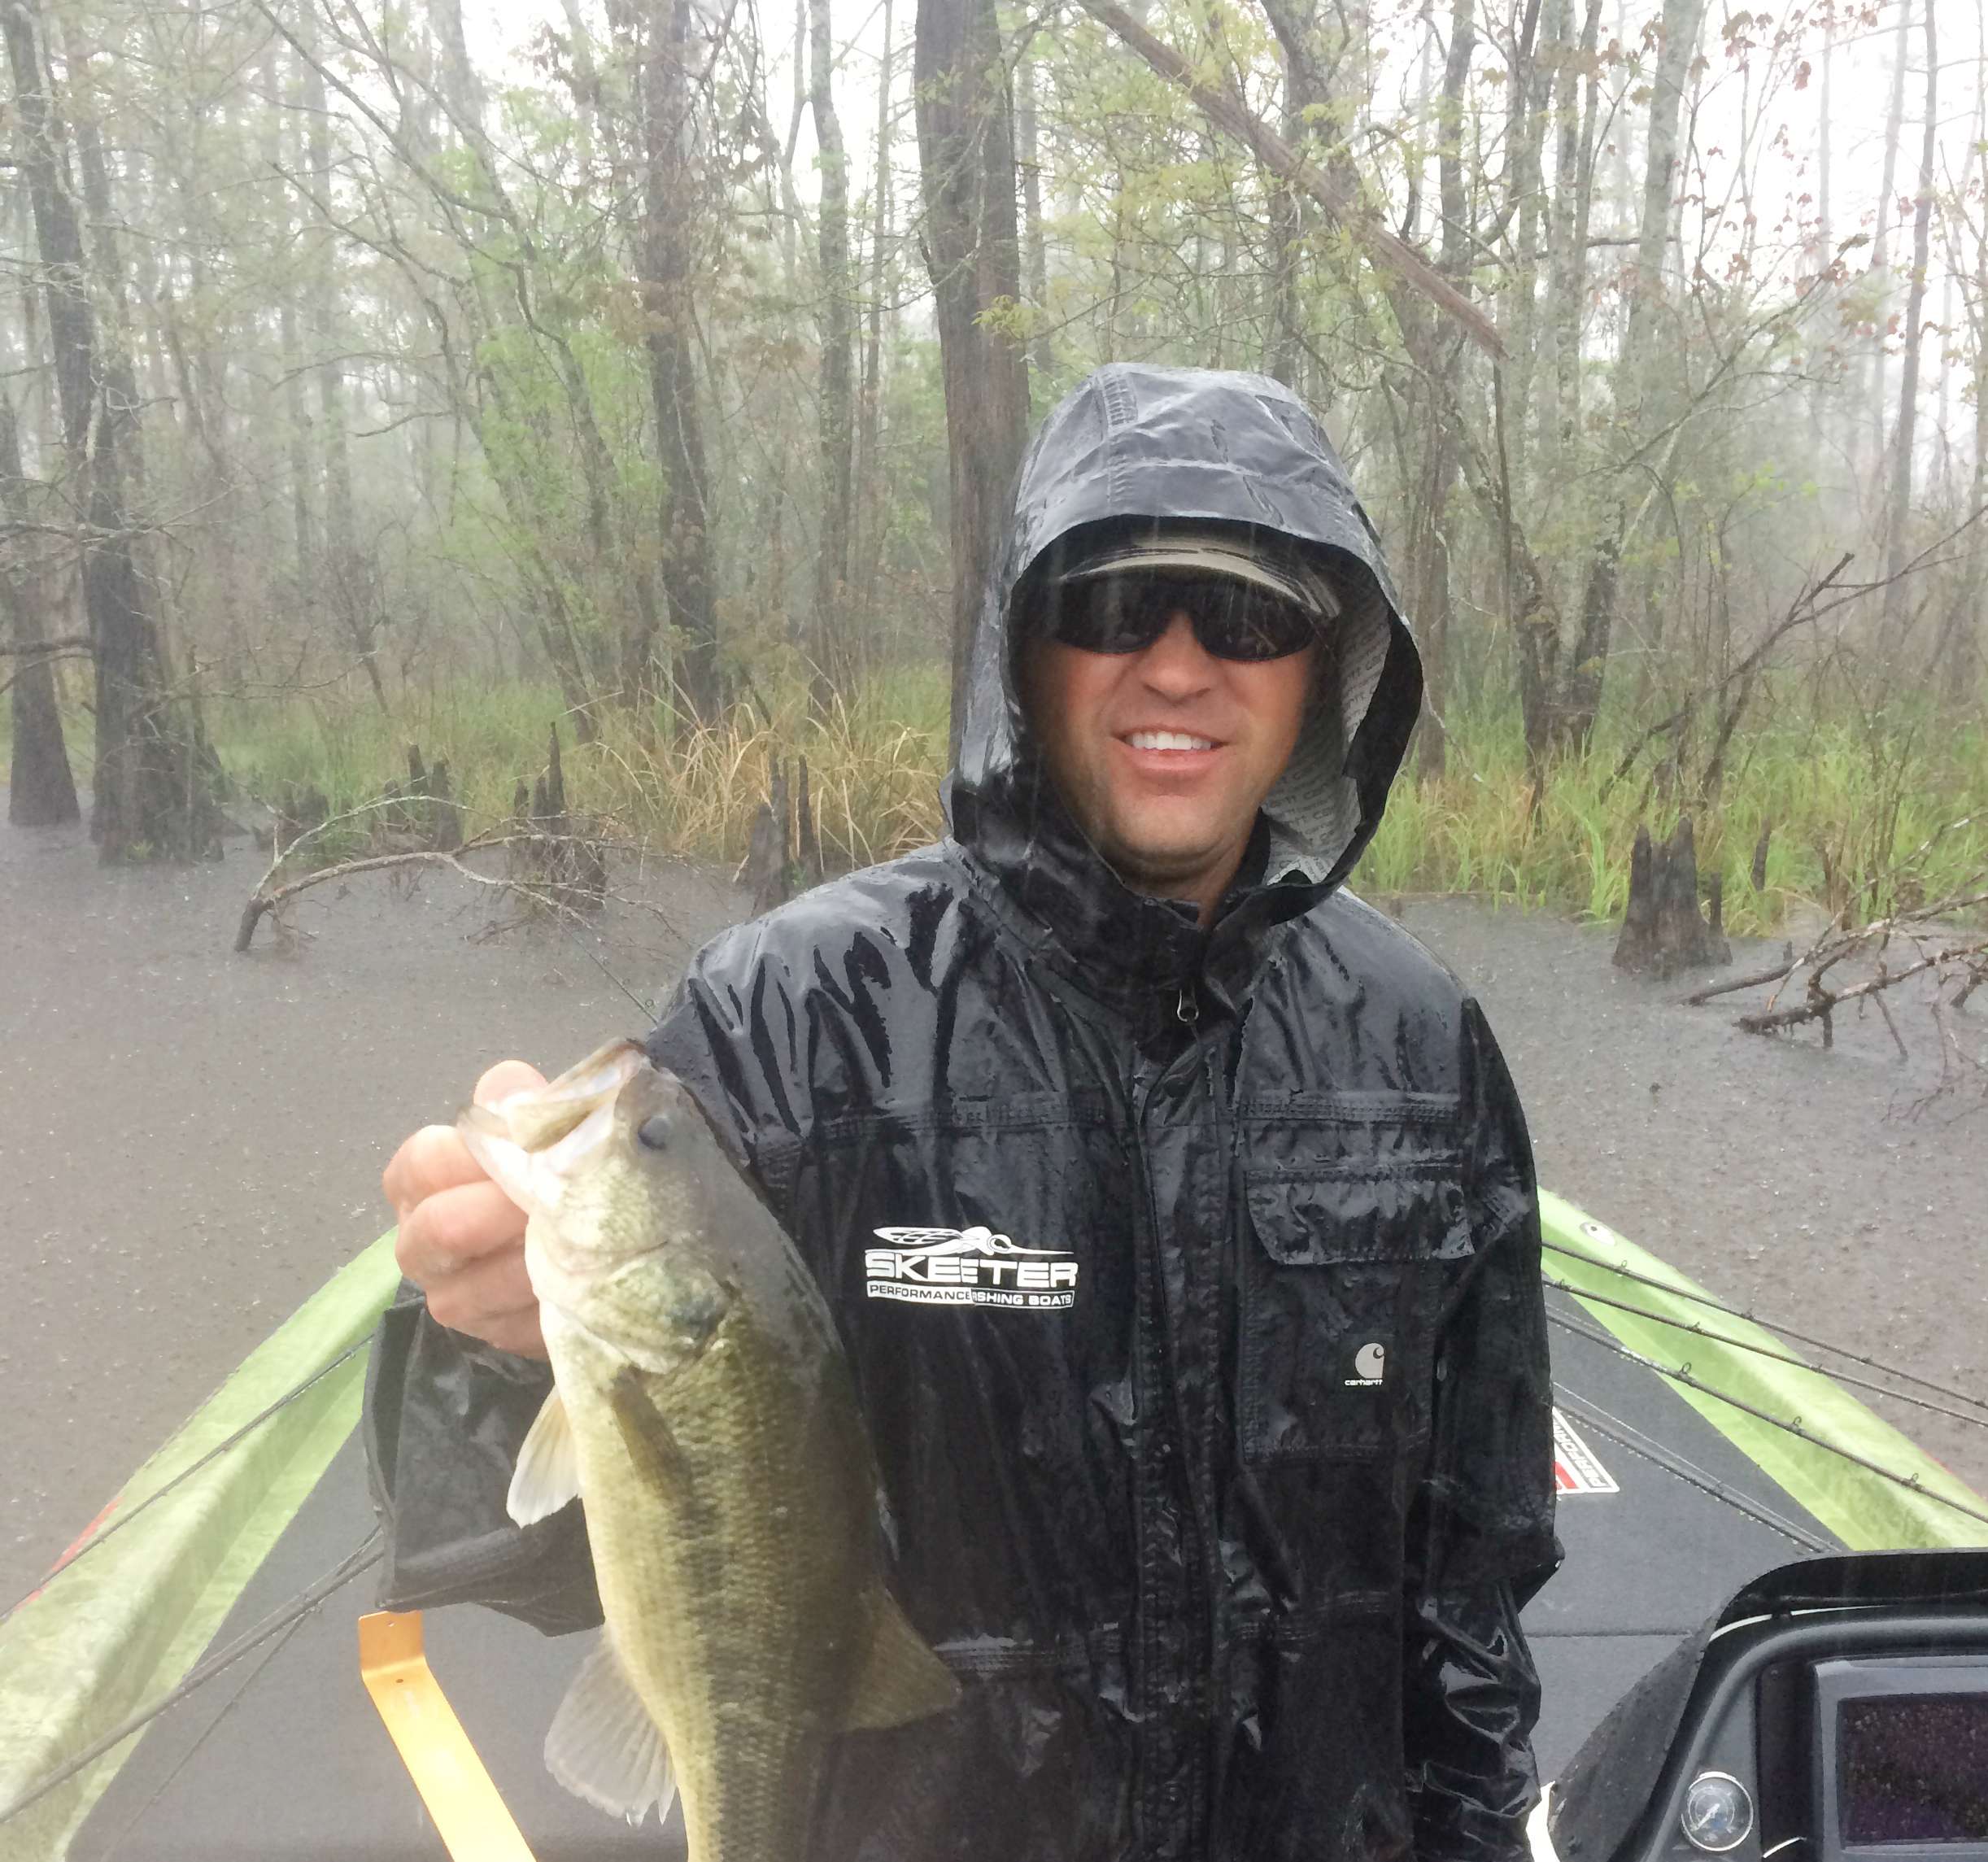 Cliff Pirch with first keeper of Day 3. Rain was steady, but fish were still biting.
<br>Photo by Bassmaster Marshal Kevin Harris